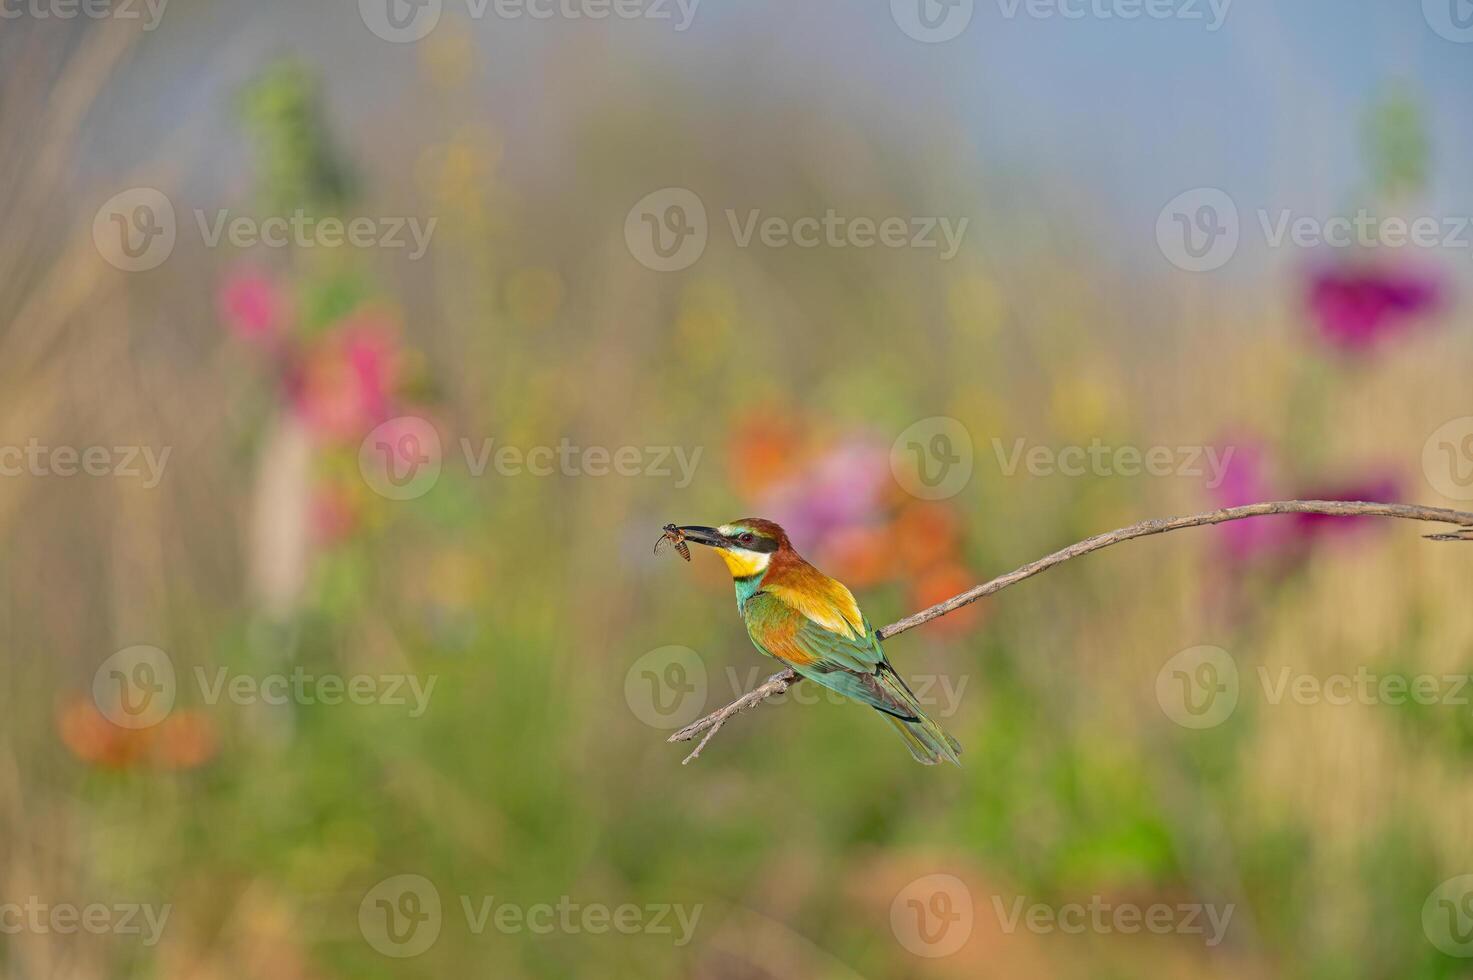 European Bee-eater Merops apiaster standing on a branch with an insect in its mouth. Blurred coloured flowers in the background. photo